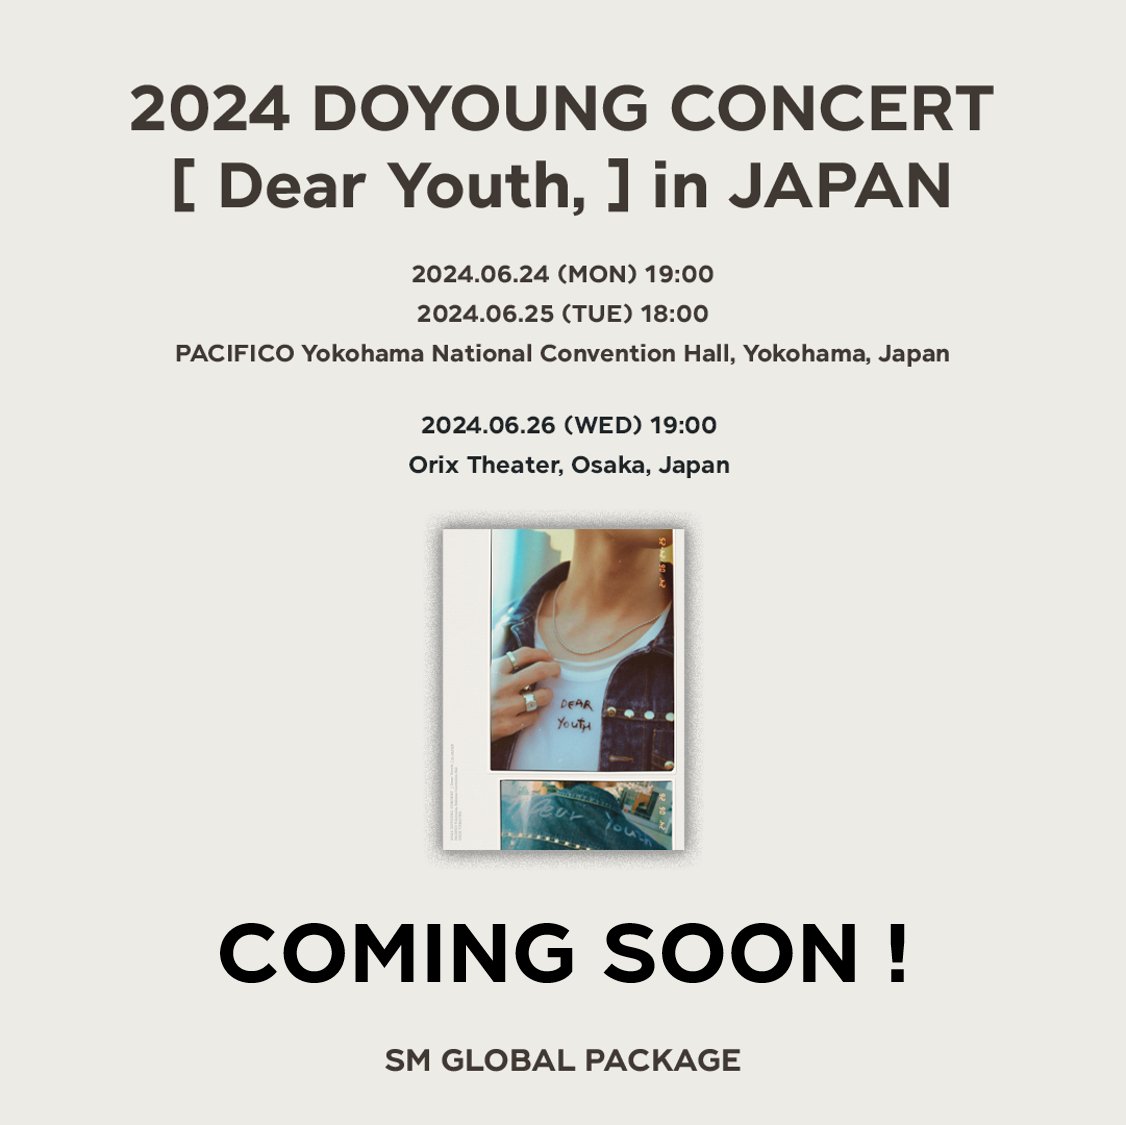 [2024 DOYOUNG CONCERT [ Dear Youth, ] in JAPAN] SM Global Package COMING SOON ! & ZZIM EVENT OPEN ! ZZIM EVENT : ~ 2024/05/20 (MON) 13:00 (KST) 💚global.smtowntravel.com #DOYOUNG #Dear_Youth #NCT #NCT127 #SMGLOBALPACKAGE #GLOBALPACKAGE #全球套餐